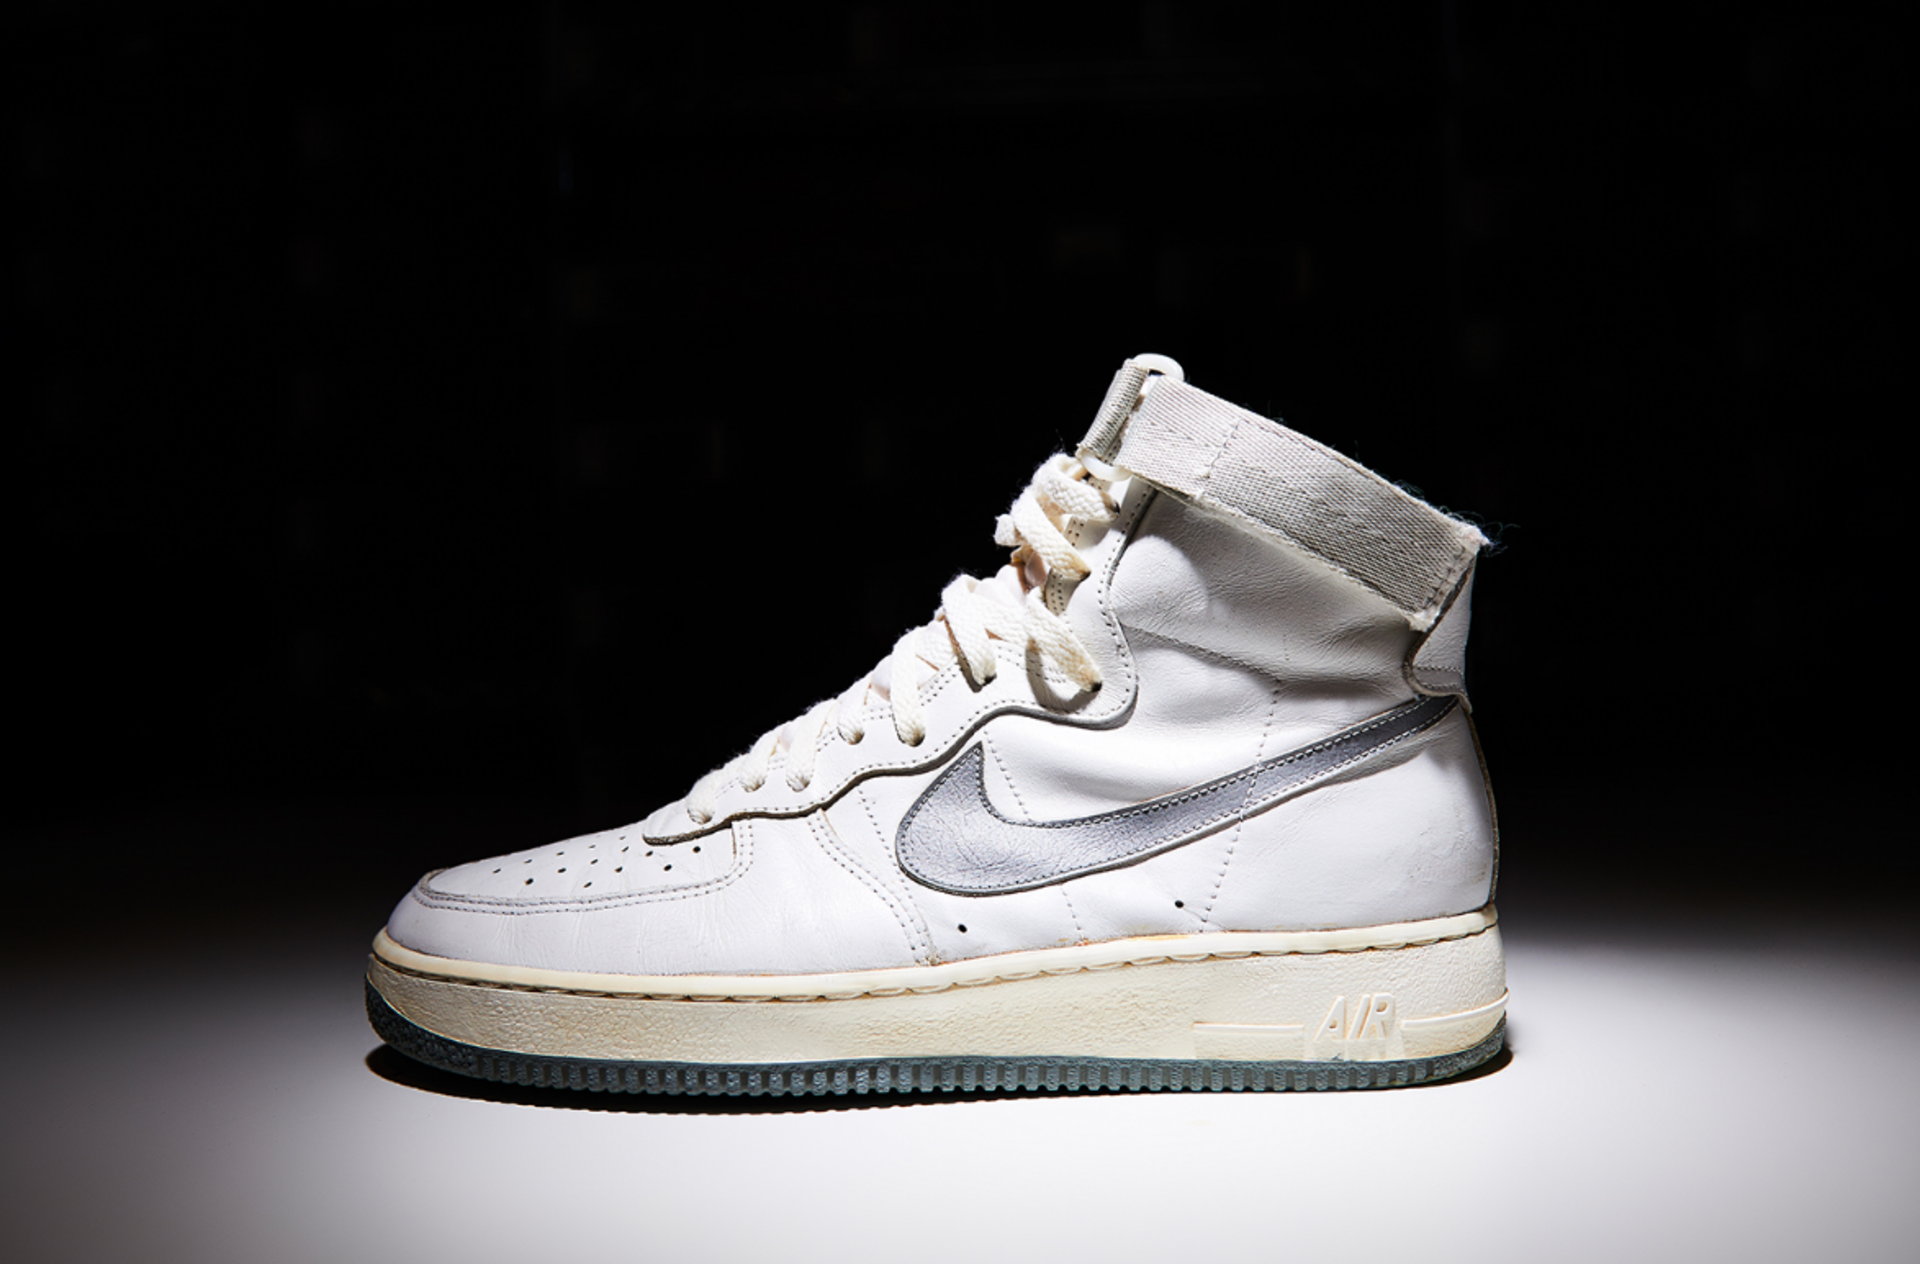 Air Force 1 - cultural icon that influenced basketball, streets and fashion